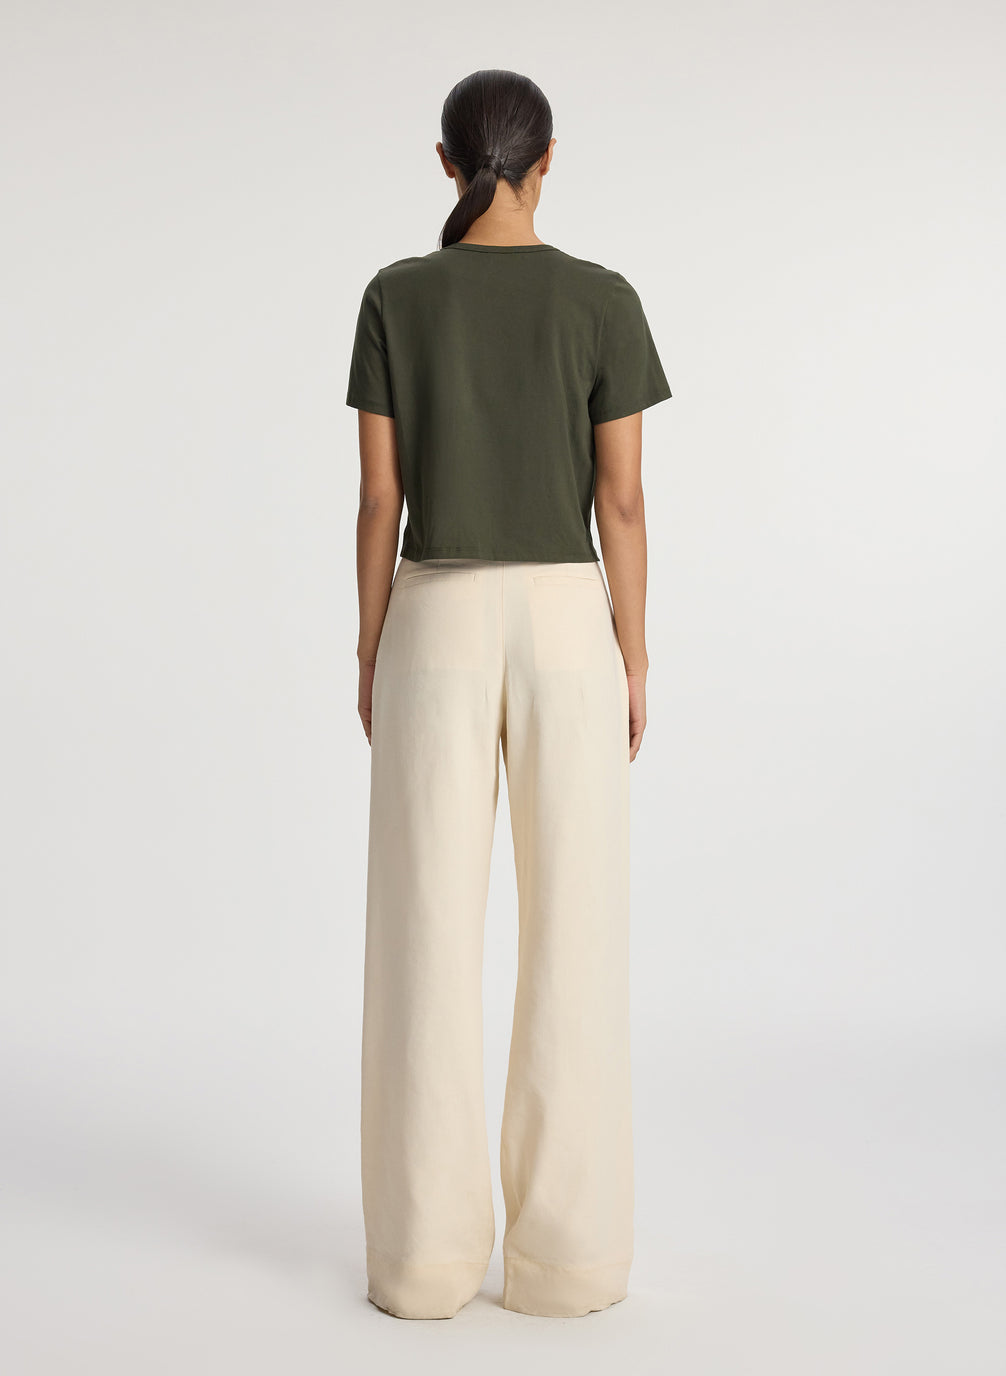 back view of woman wearing olive green short sleeve tshirt and beige wide leg pants